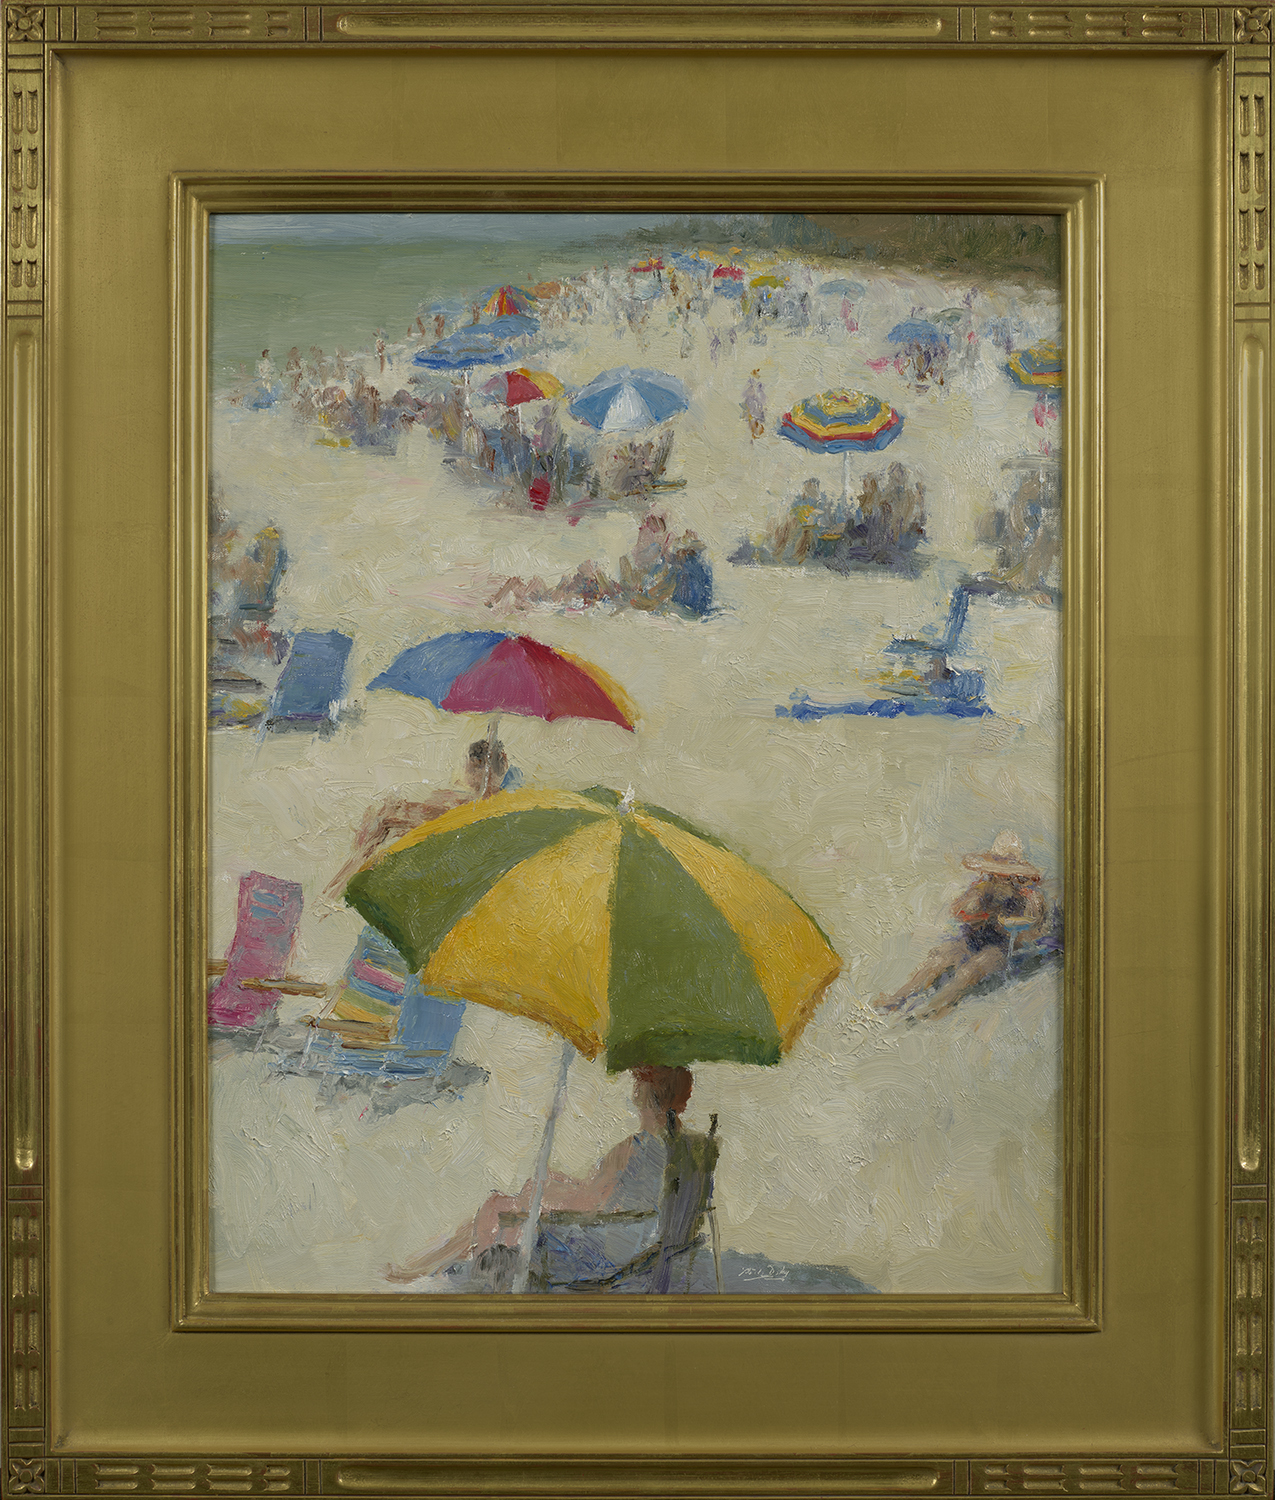 mark_daly_md1087_yellow_and_green_umbrella_framed.jpg